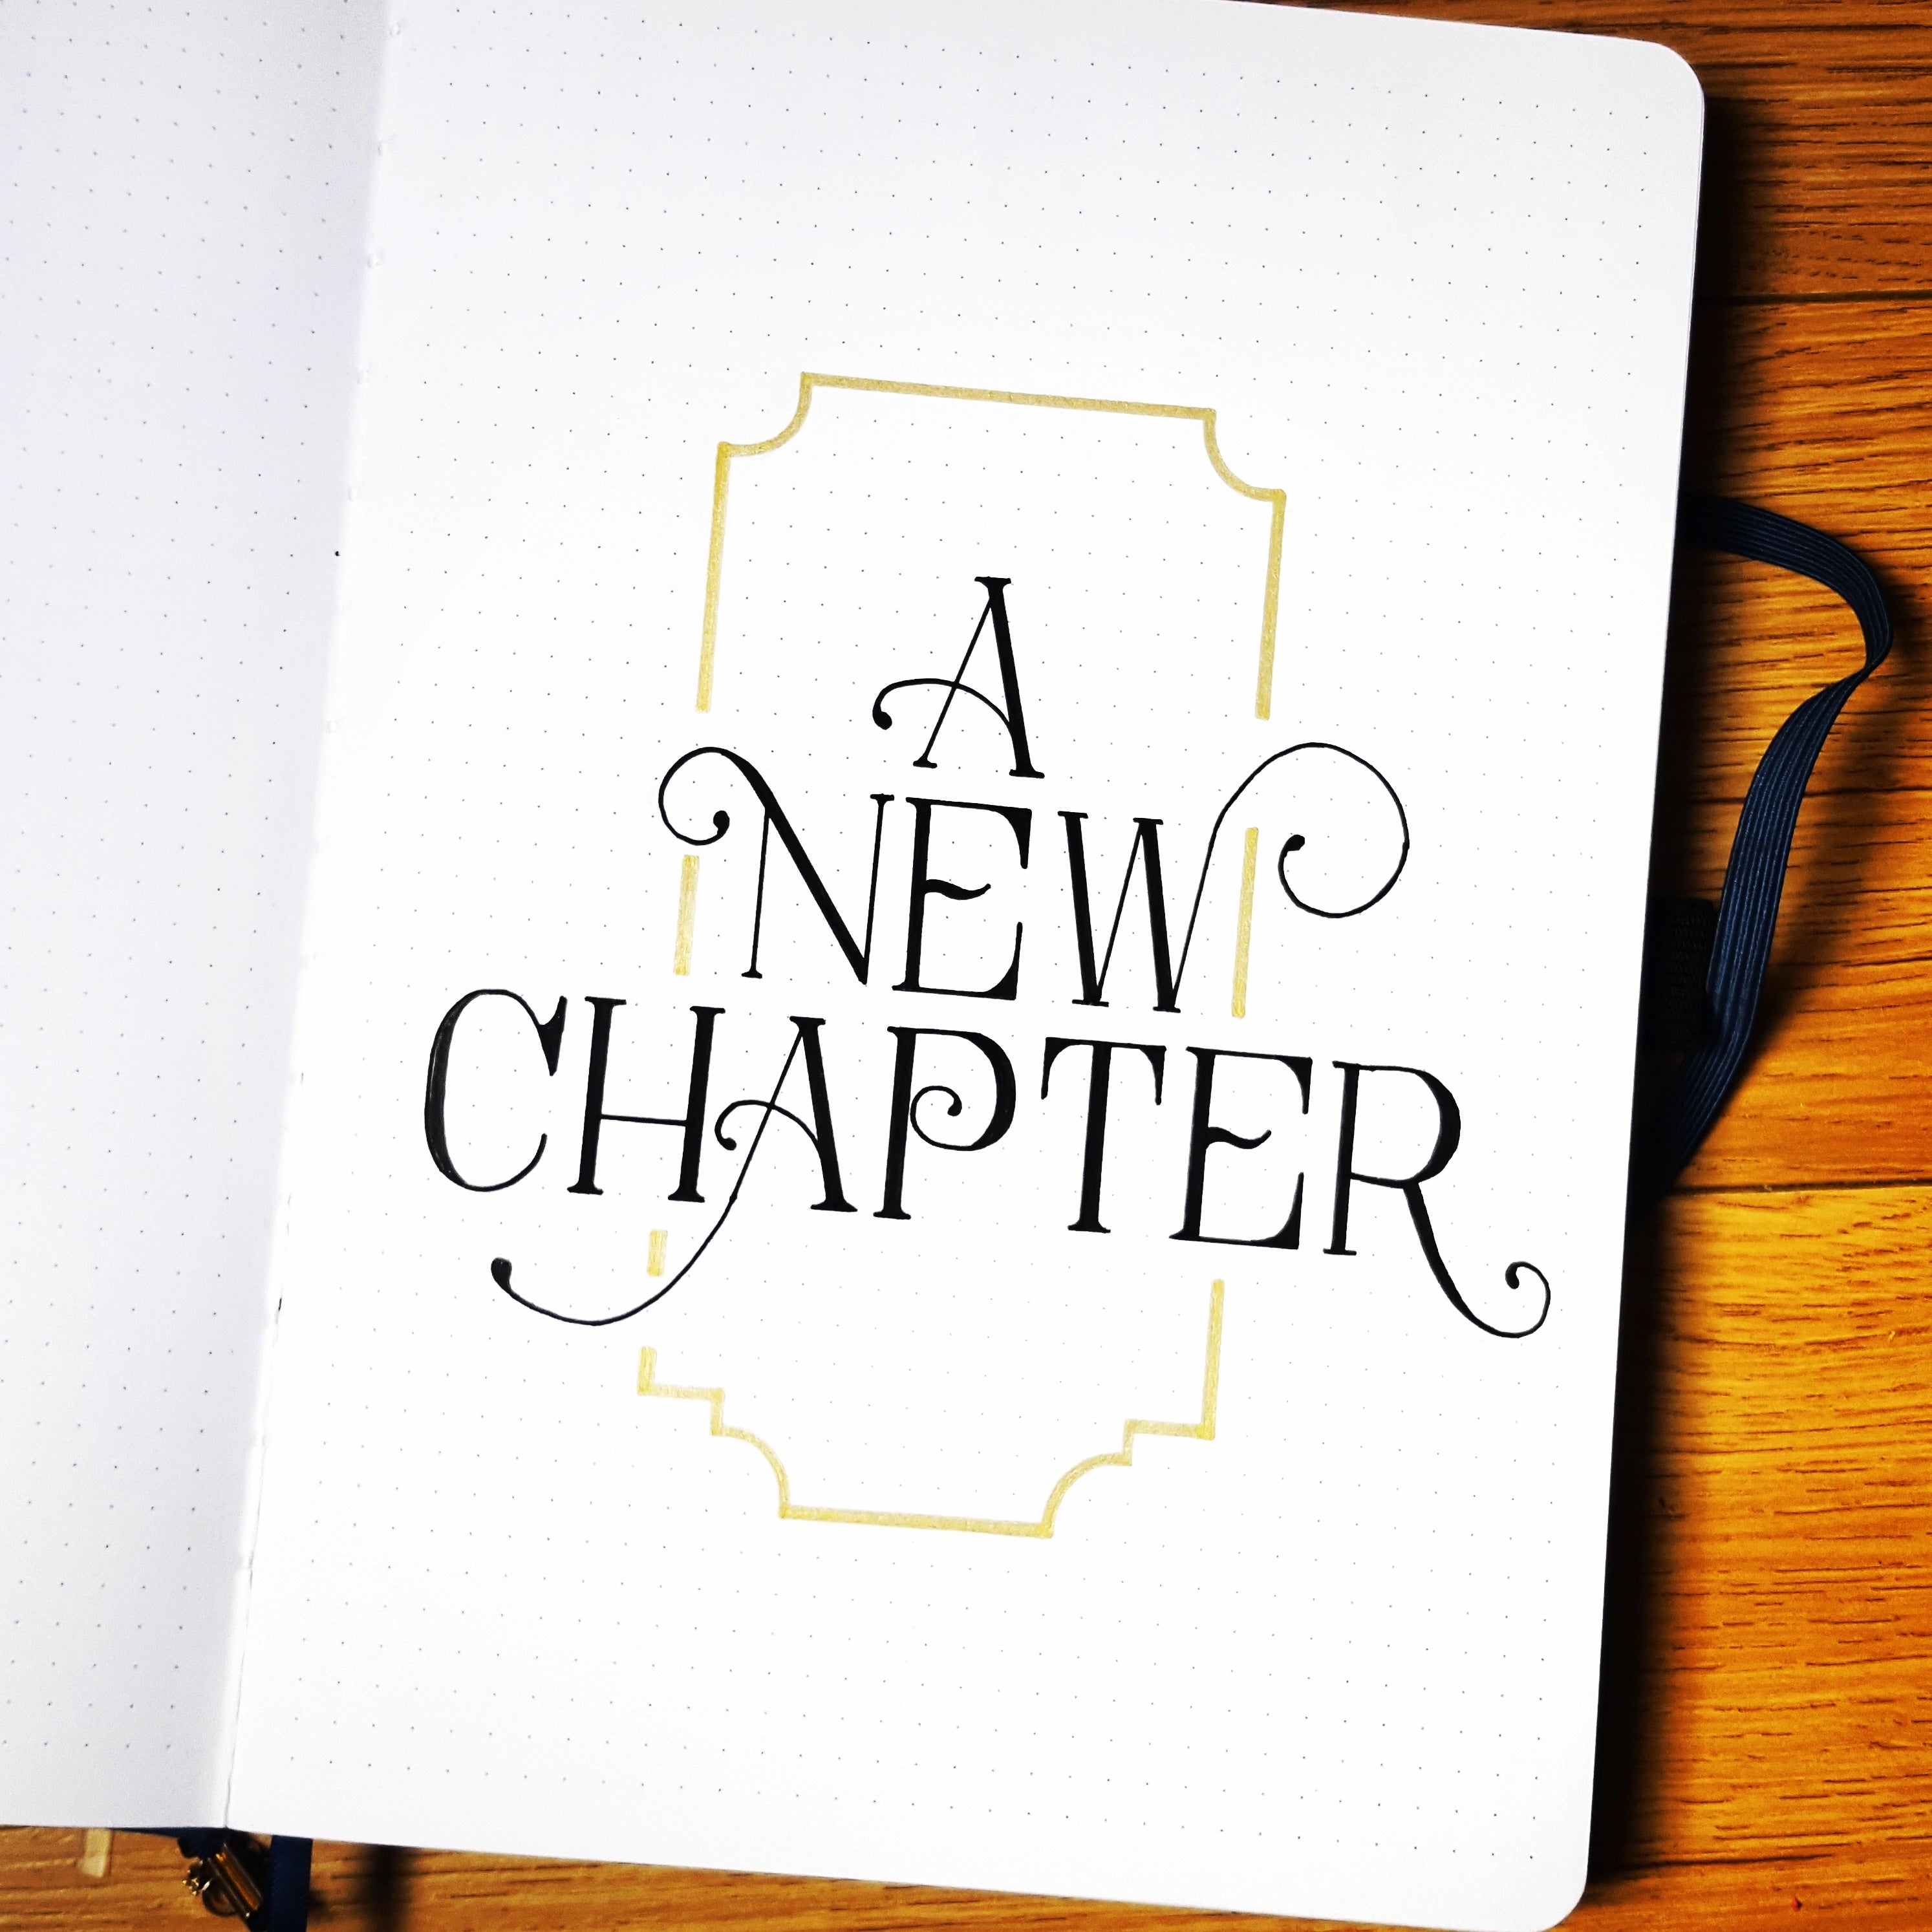 image of hand lettered quote "A new chapter" by artistnamedhelen